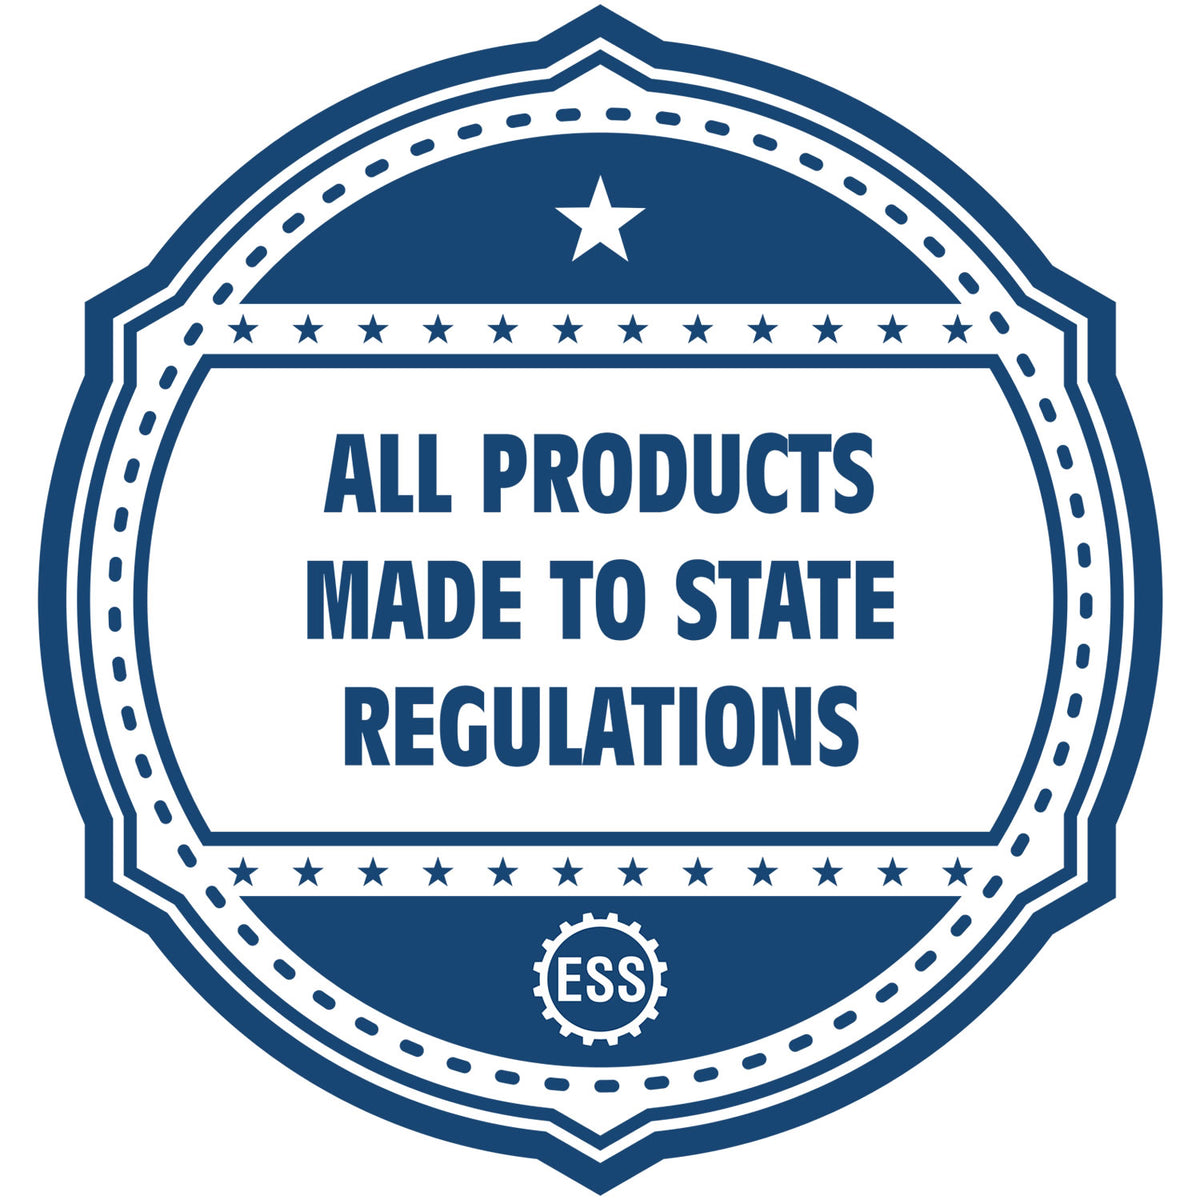 An icon or badge element for the Digital Montana PE Stamp and Electronic Seal for Montana Engineer showing that this product is made in compliance with state regulations.